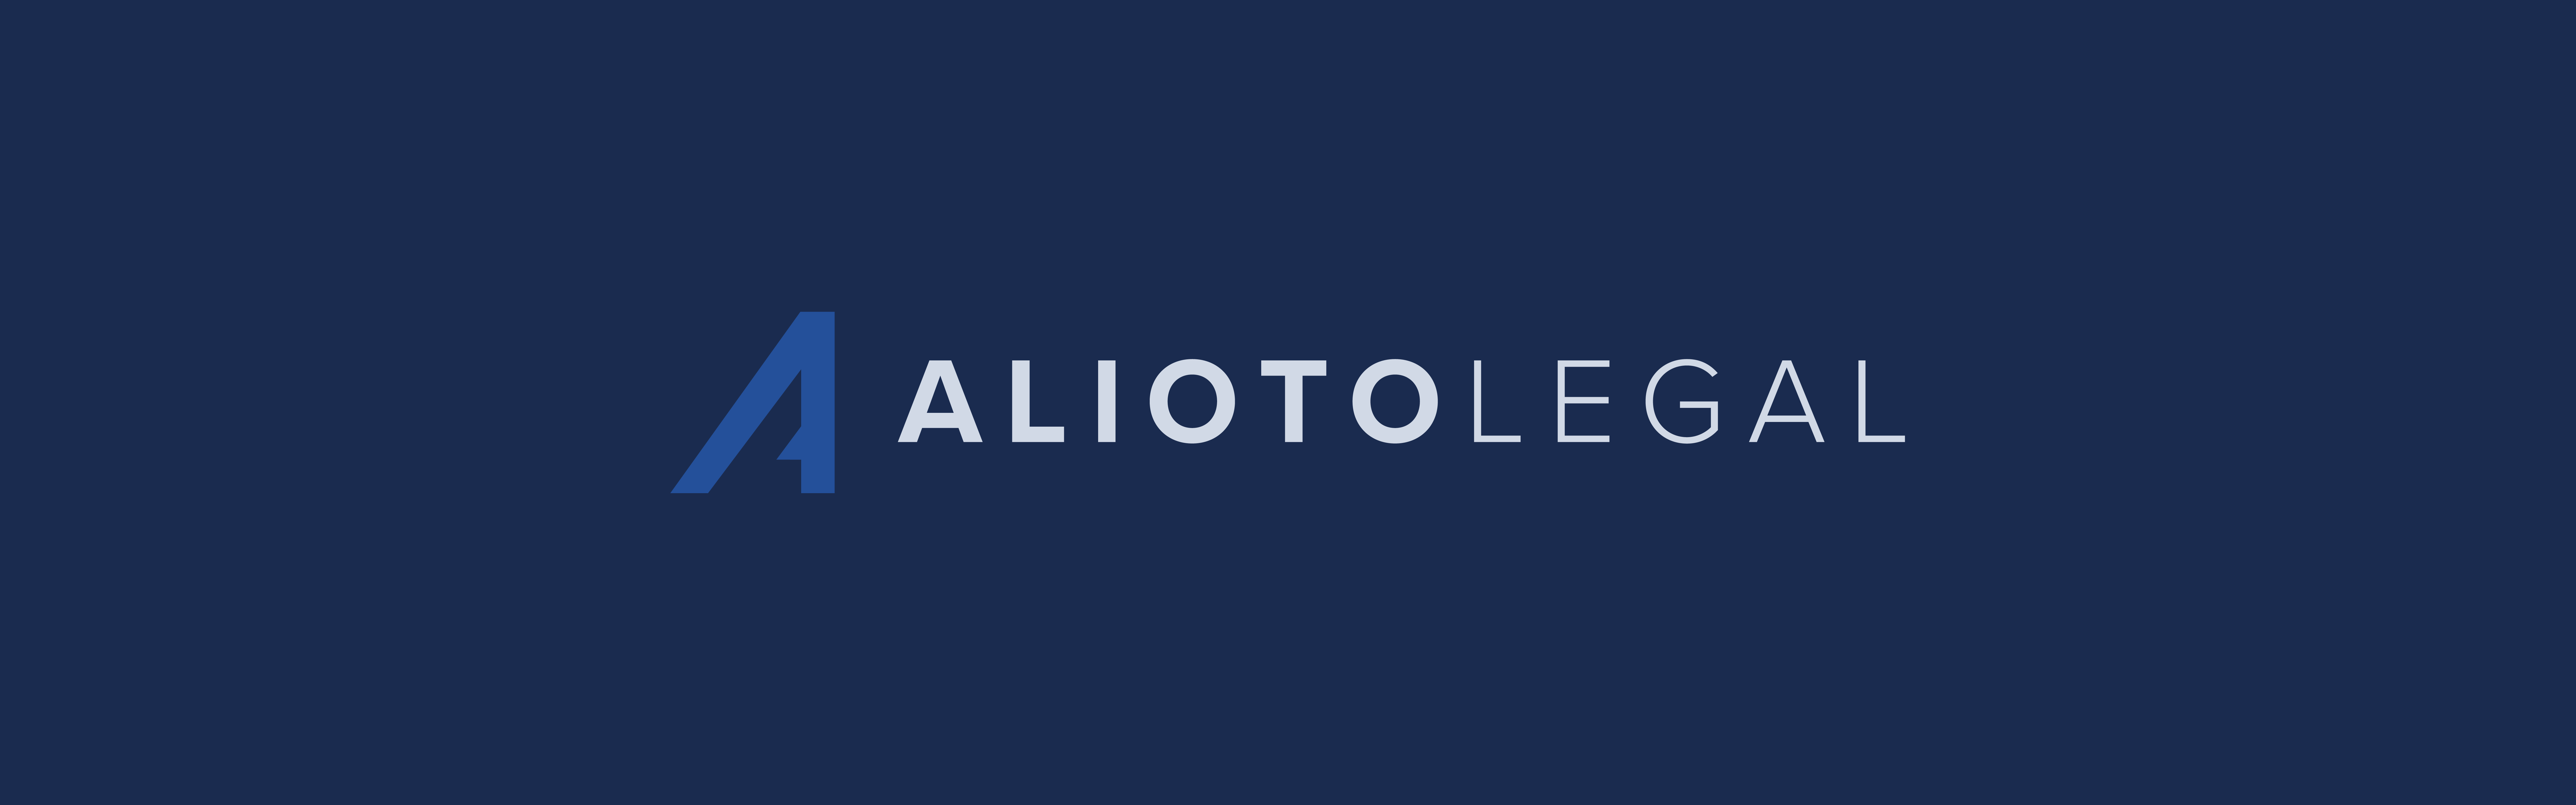 The image displays a dark blue background with the text "ALIOTO LEGAL" in capital letters, accompanied by a stylized letter 'A' that resembles an upward arrow to the left of it